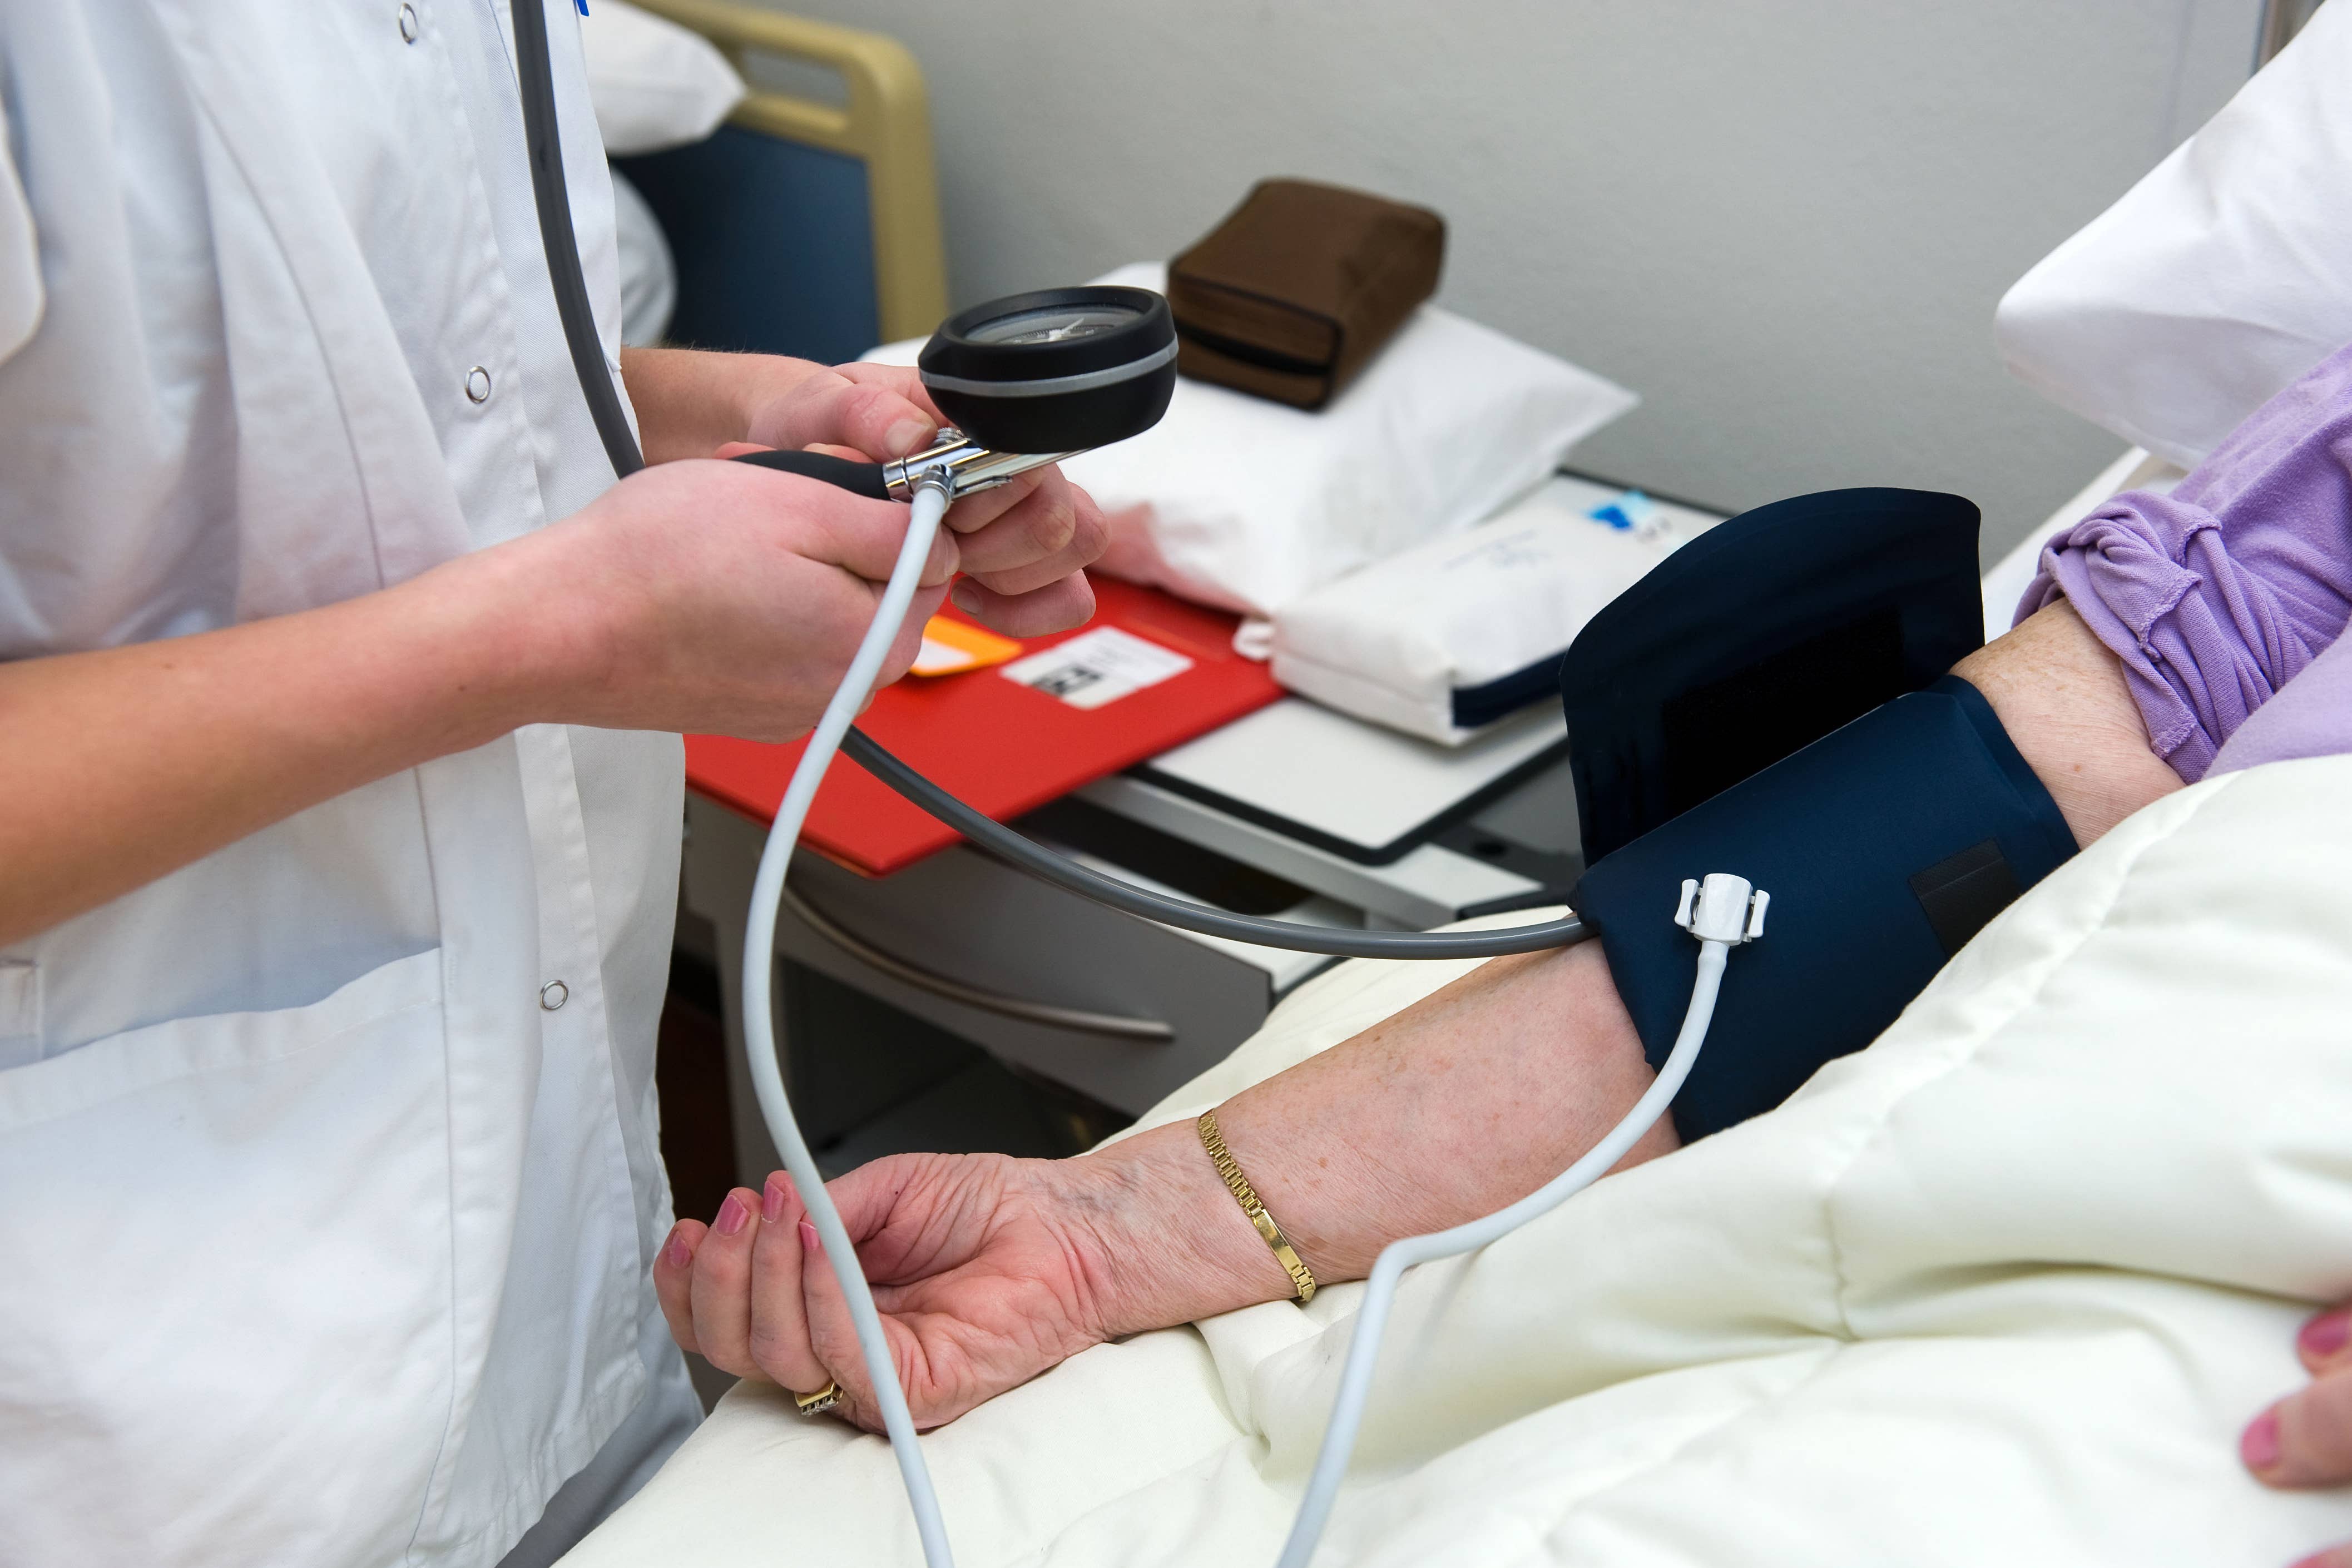 pa ready, people, research, university of dundee, school of medicine, italy, body clock could determine best time for blood pressure medication, study shows